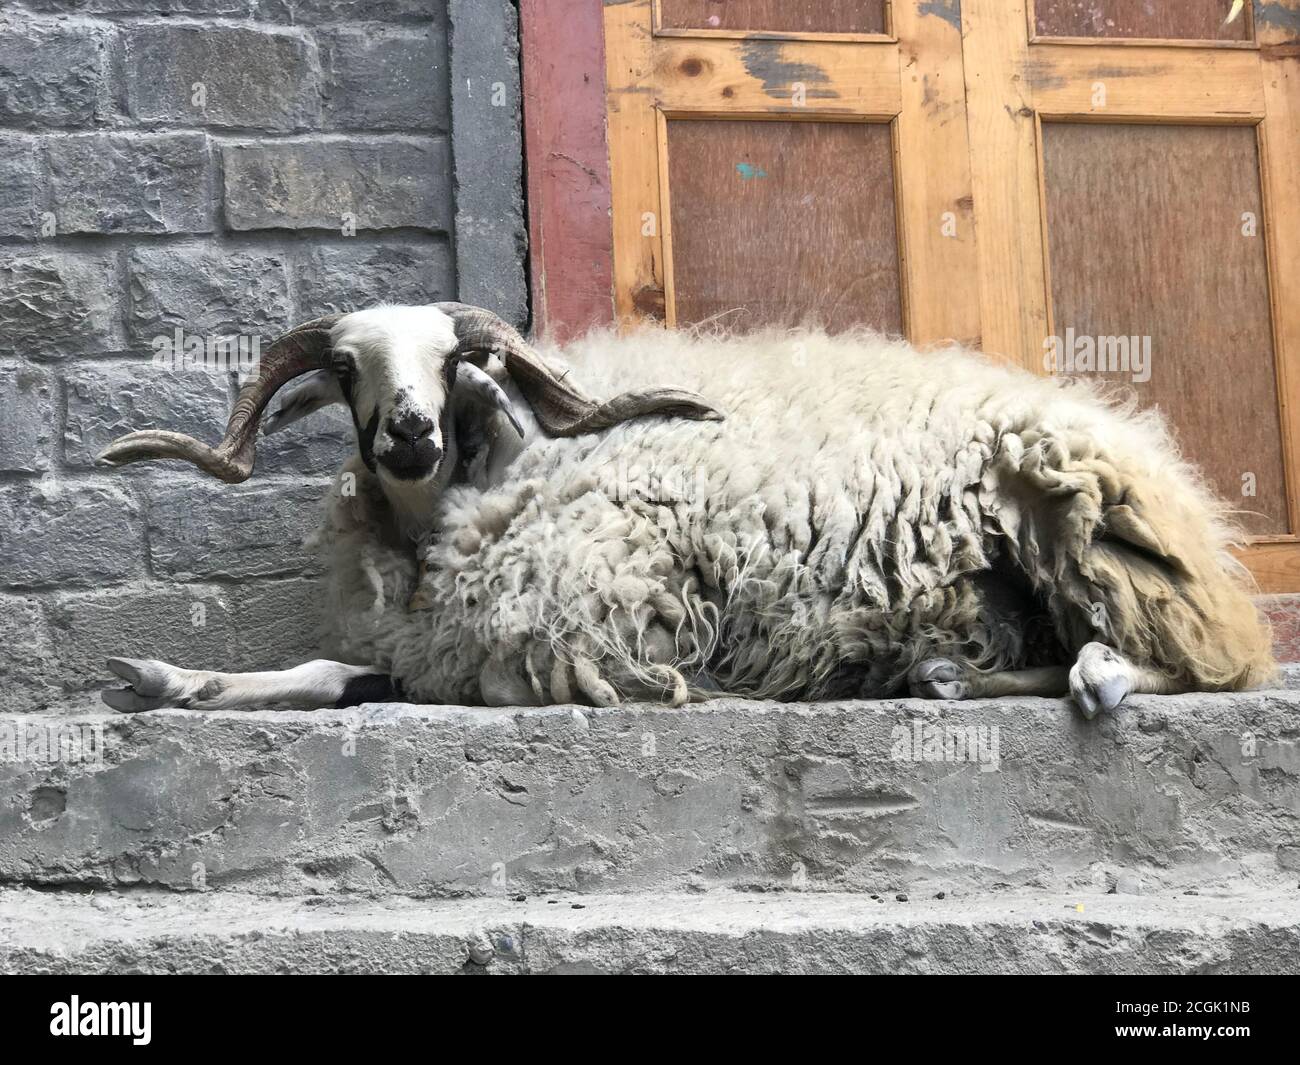 Large shaggy nepalese ram with horns in village Kagbeni, Upper Mustang, Nepal. Wool of himalayan sheep produces natural products from local cashmere. Stock Photo